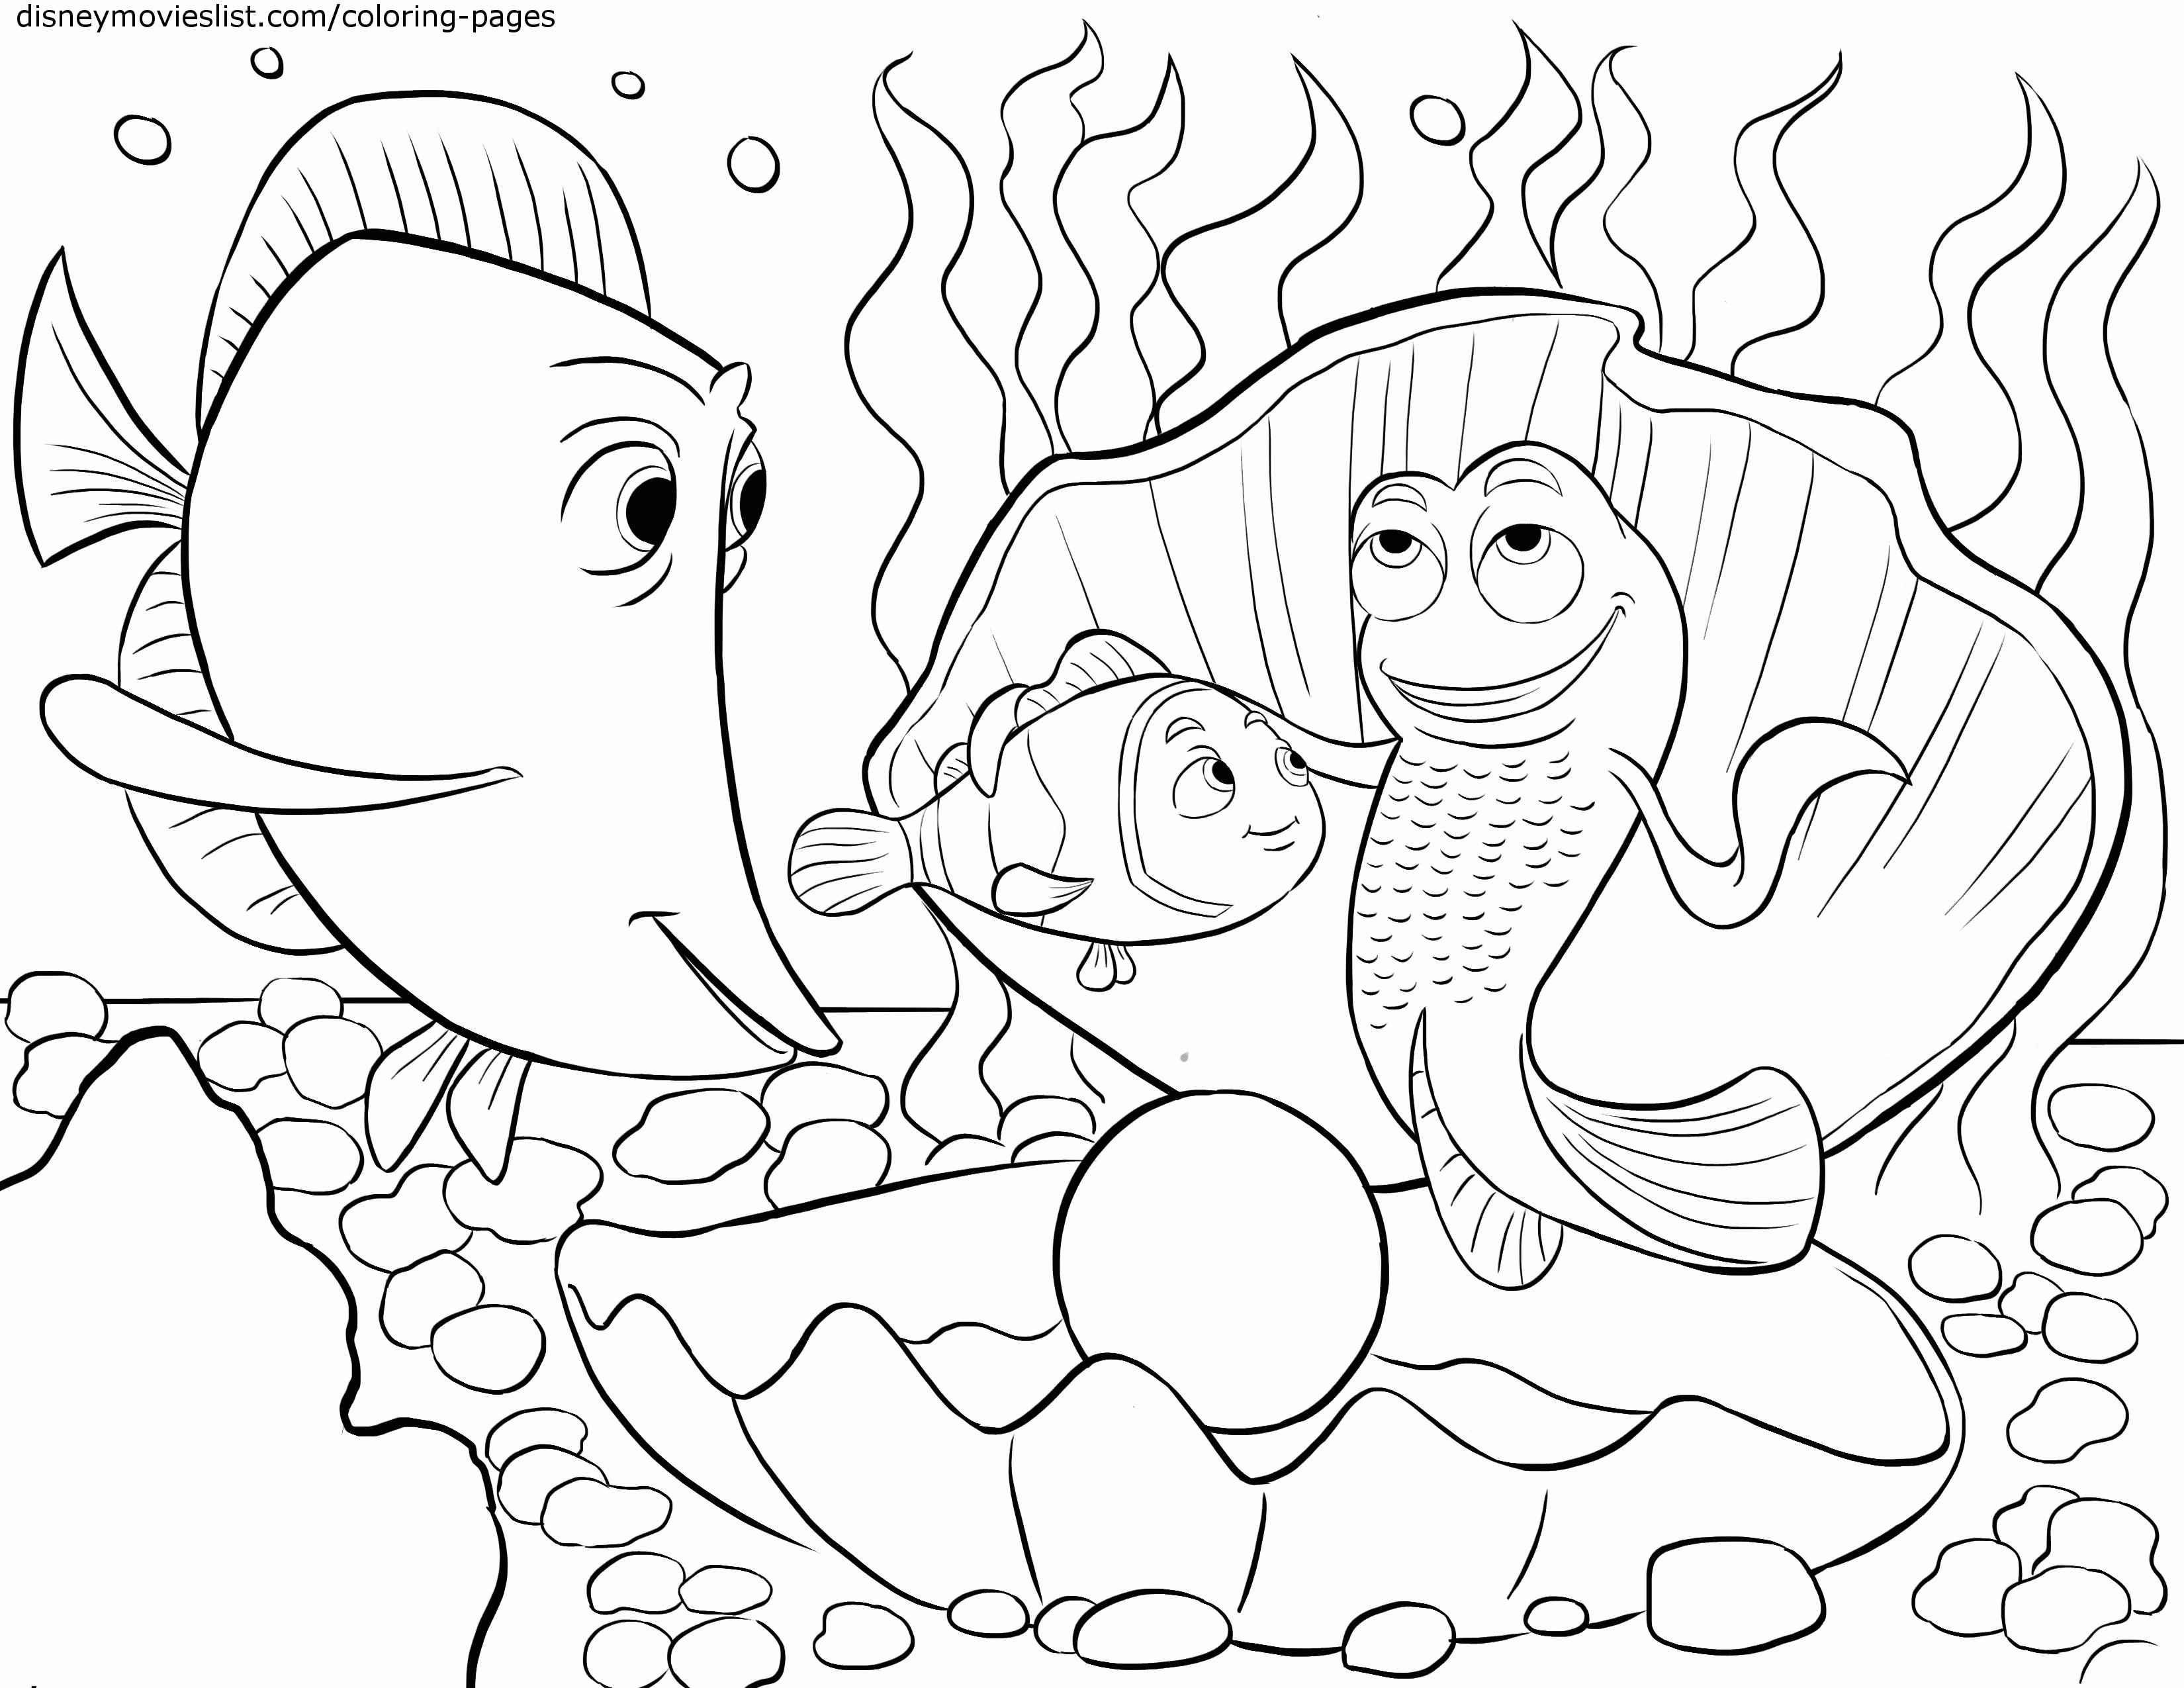 Disney's Finding Nemo Coloring Pages Sheet, Free Disney Printable